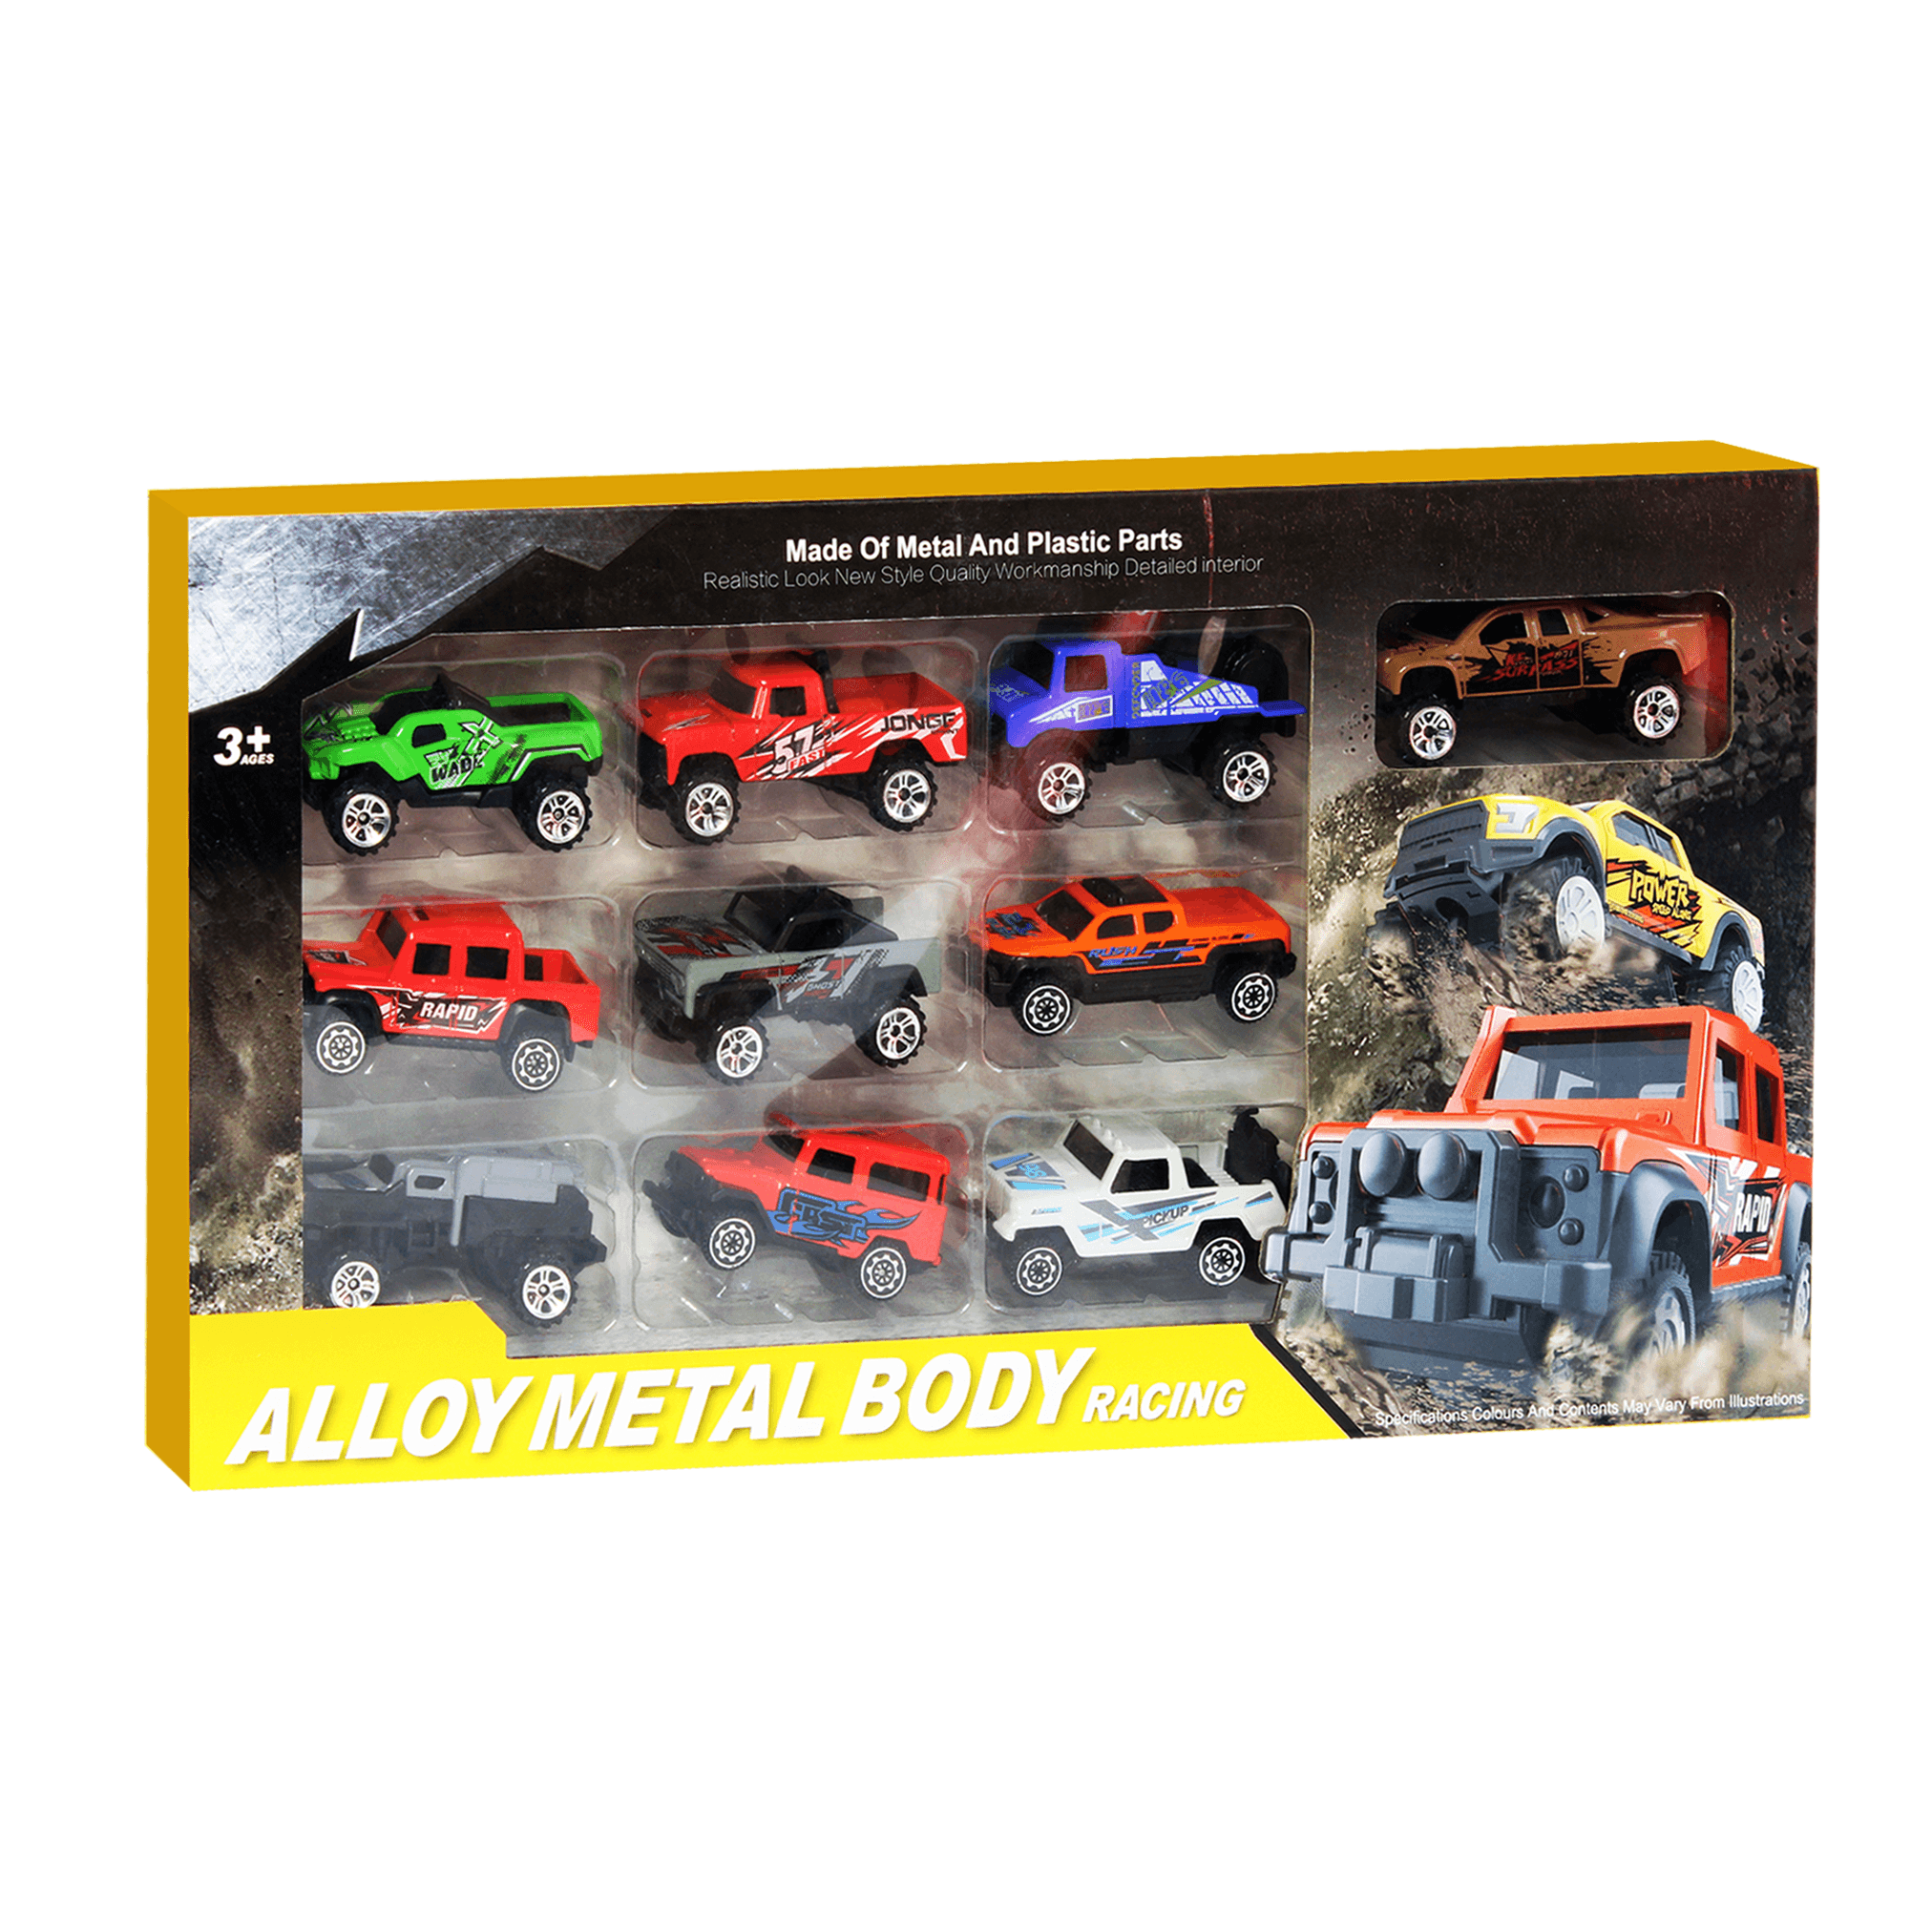 E-More Toy Cars for Kids 10 Pack Racing Cars Toy Set Metal Toy Car Model Vehicle Set for Toddlers - BumbleToys - 5-7 Years, 8-13 Years, Boys, Collectible Vehicles, Pre-Order, Toy Land